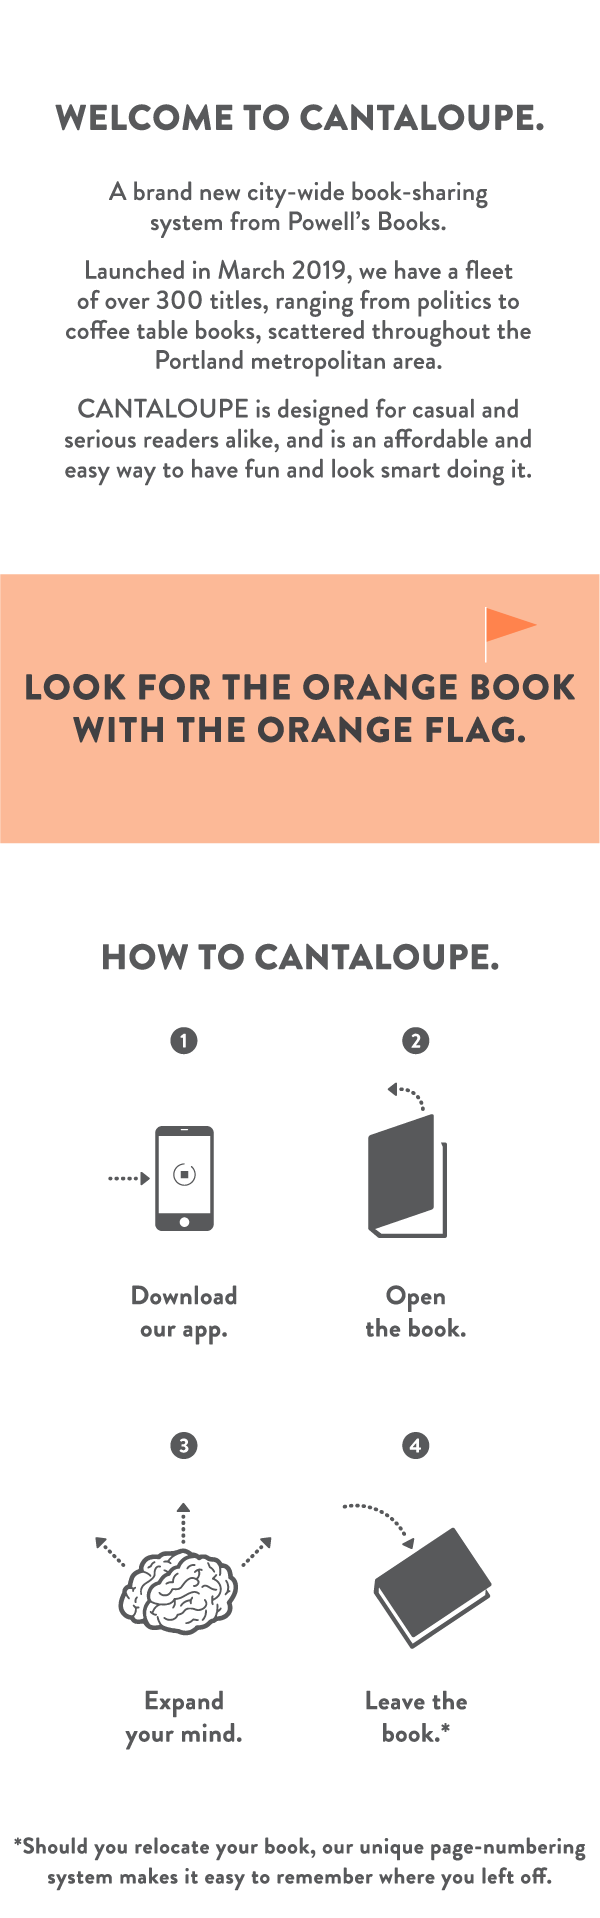 Welcome to Cantaloupe. A brand new city-wide book-sharing system from Powell's Books. Launched in March 2019, we have a fleet of over 300 titles, ranging from politics to coffee table books, scattered throughout the Portland metropolitan area. Cantaloupe is designed for casual and serious readers alike, and is an affordable and easy way to have fun and look smart doing it. Look for the orange book with the orange flag. How to cantaloupe. Download our app. Open the book. Expand your mind. Leave the book.* Should you relocate your book, our unique page-numbering system makes it easy to remember where you left off.